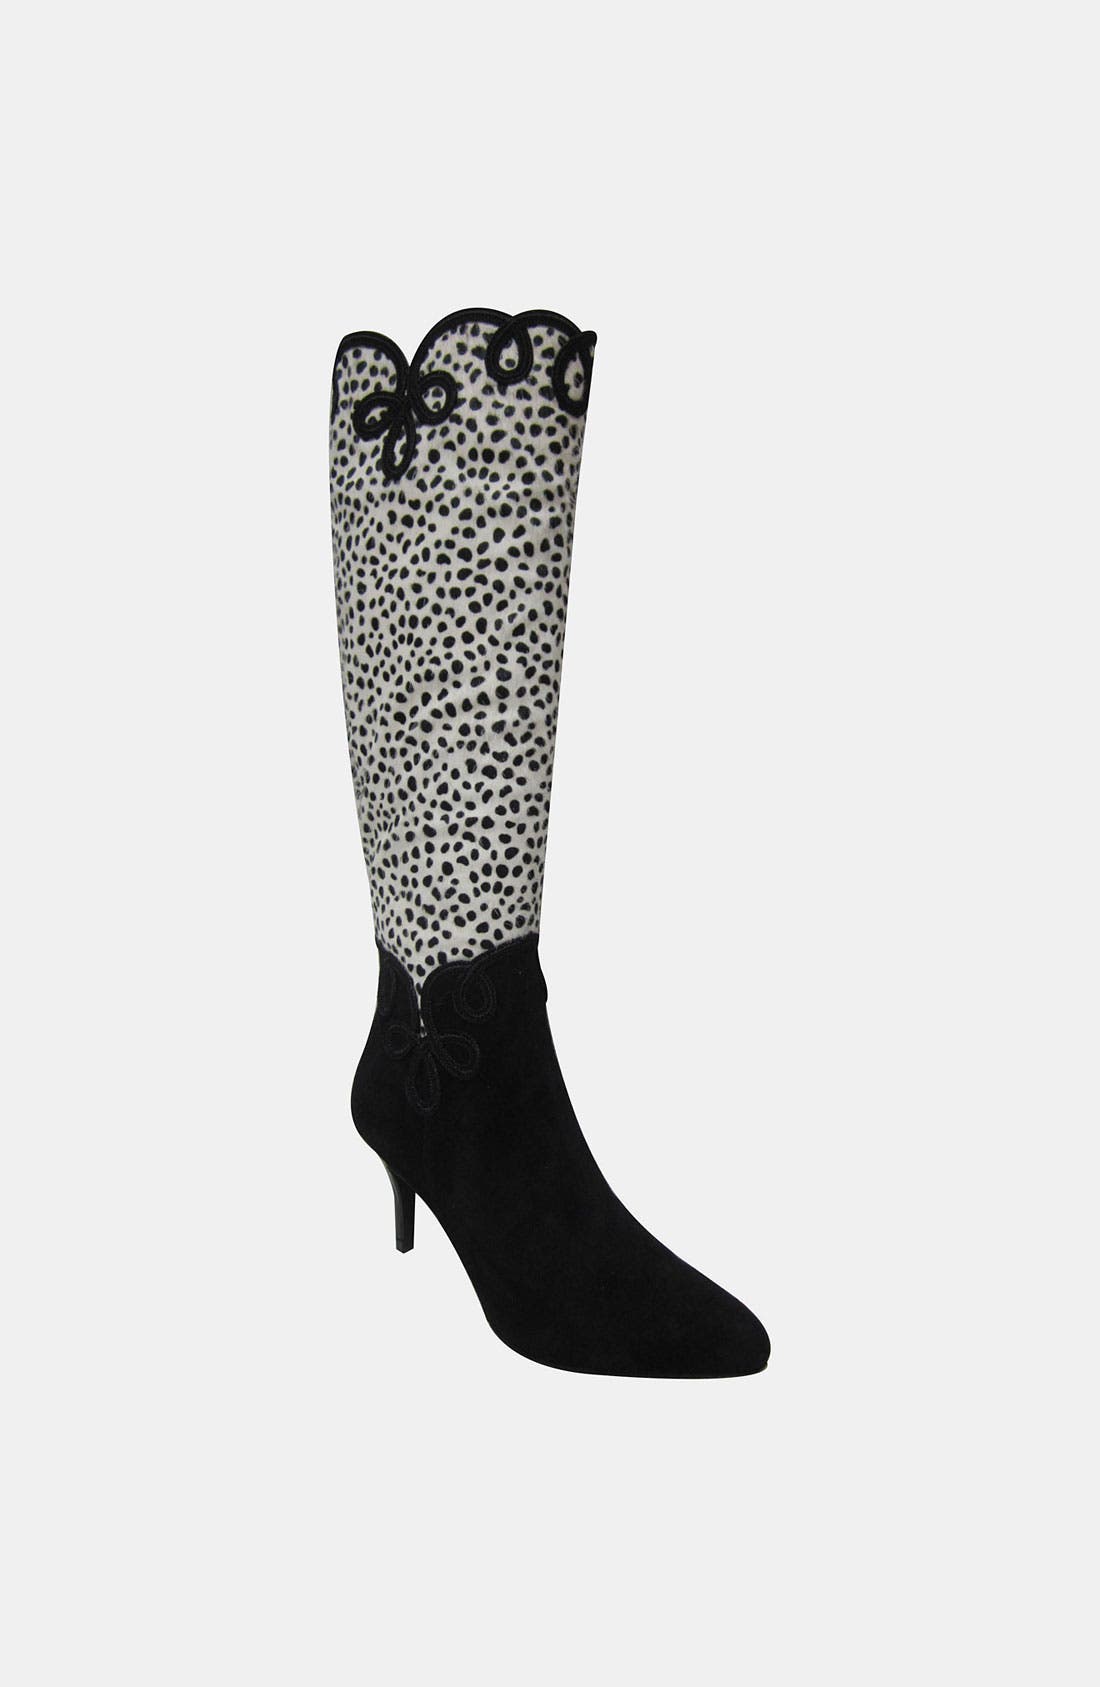 nordstrom tall black boots